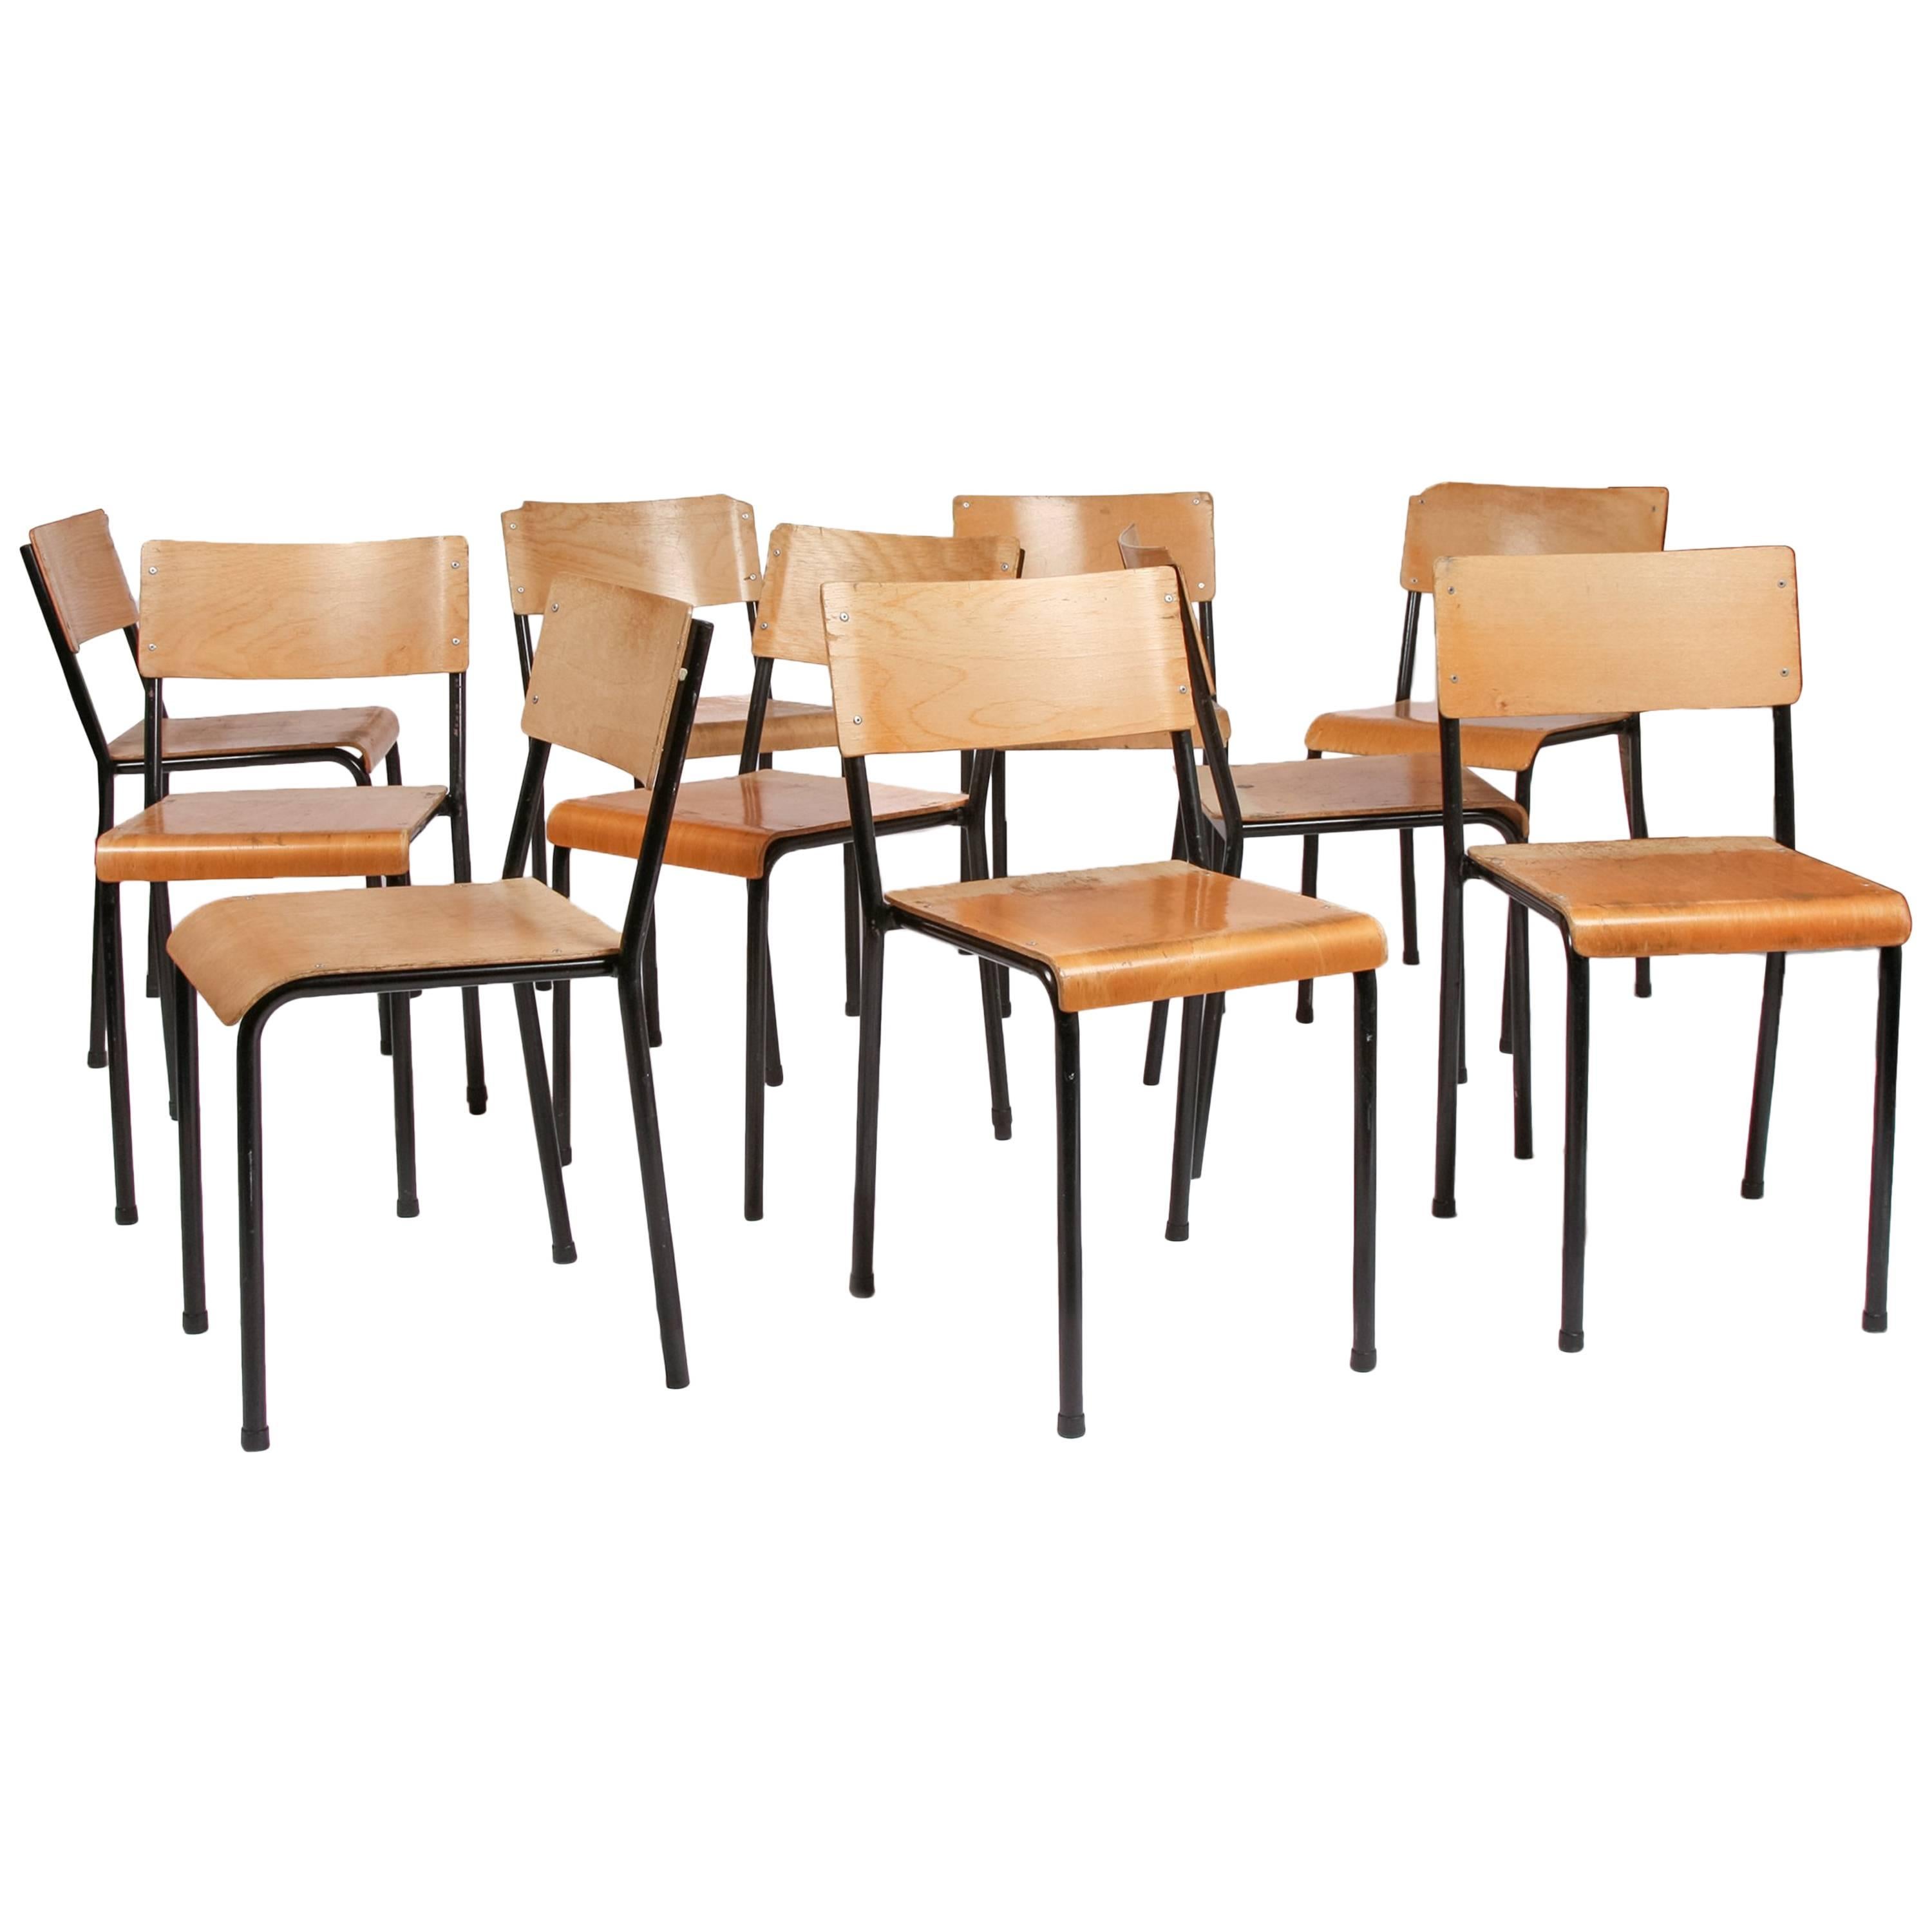 Retro Stacking Chairs For Sale